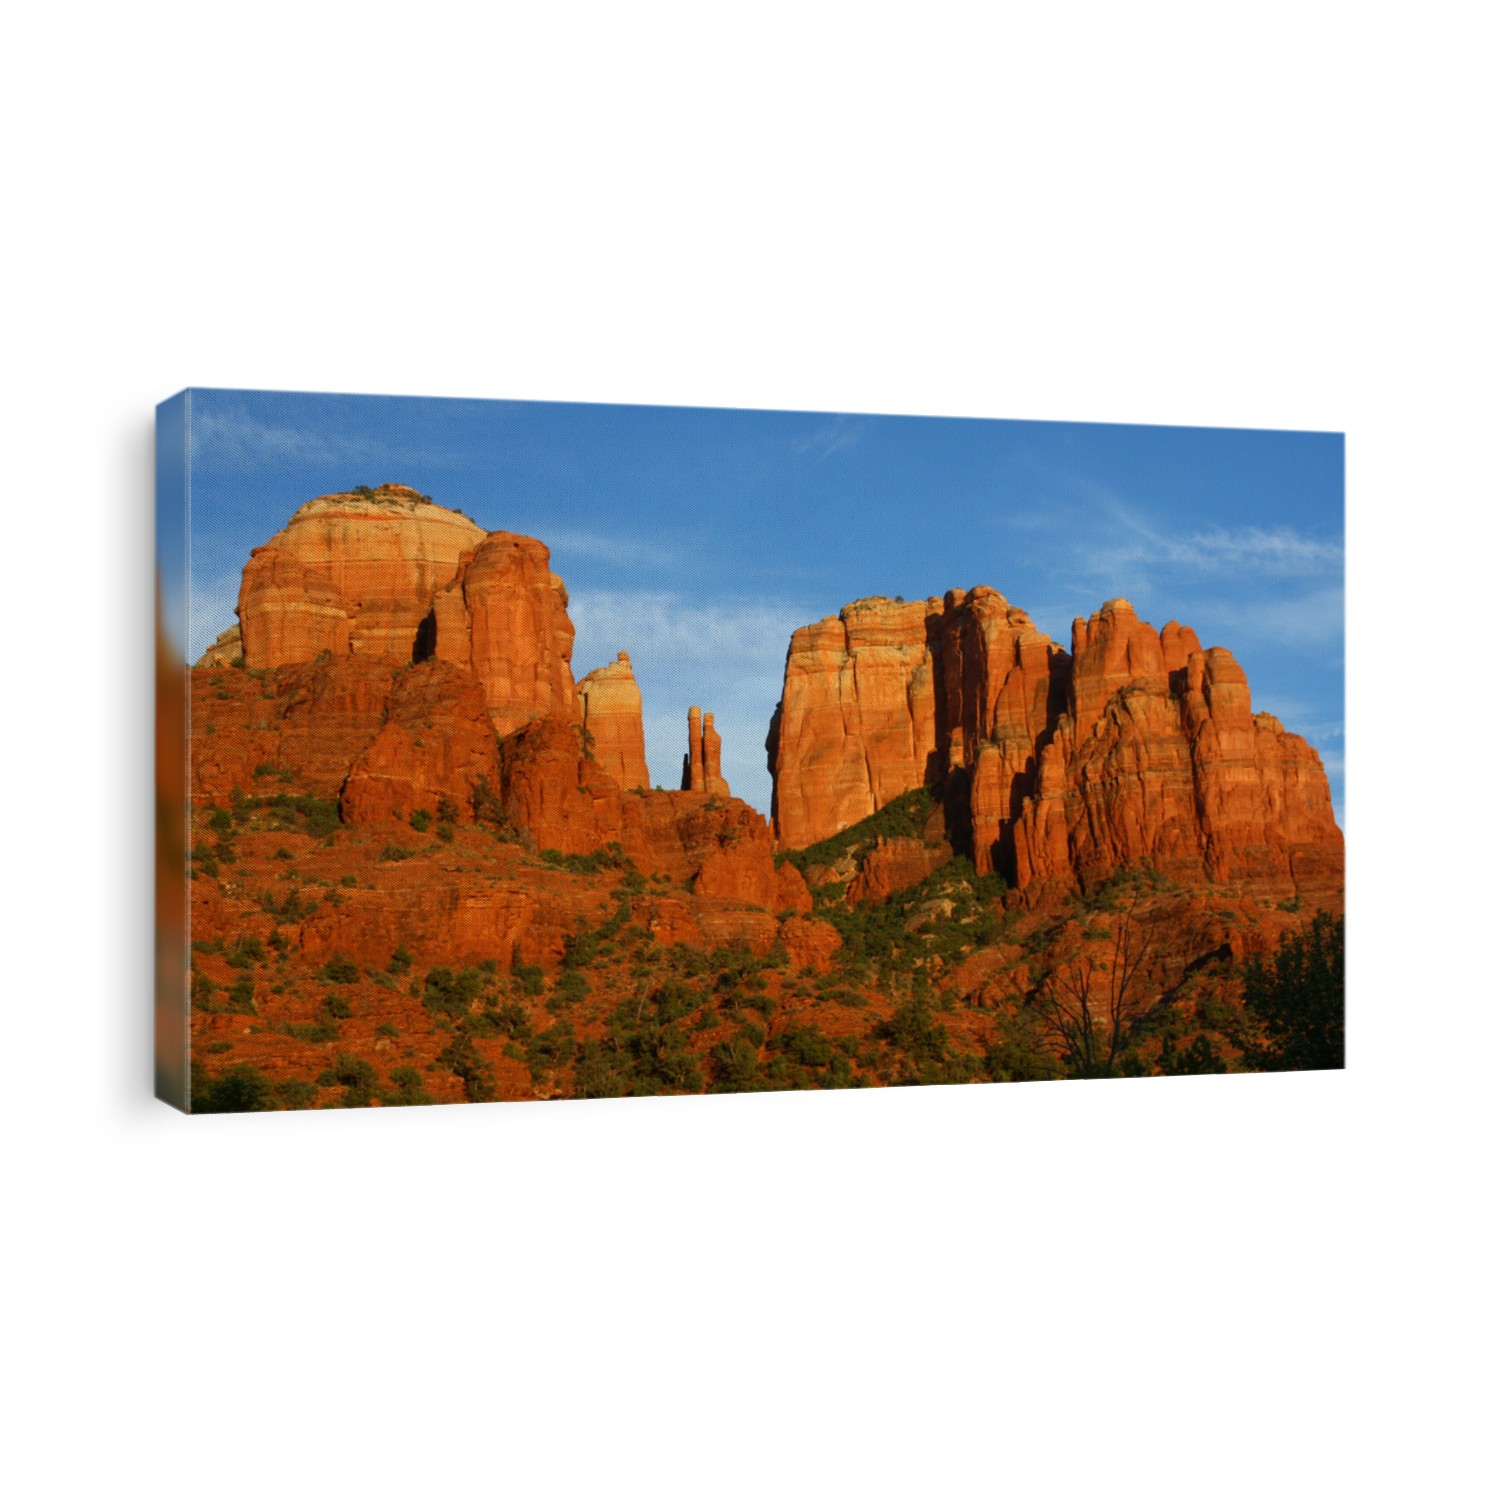 Sedona's Cathedral Rock at Sunset, wide angle